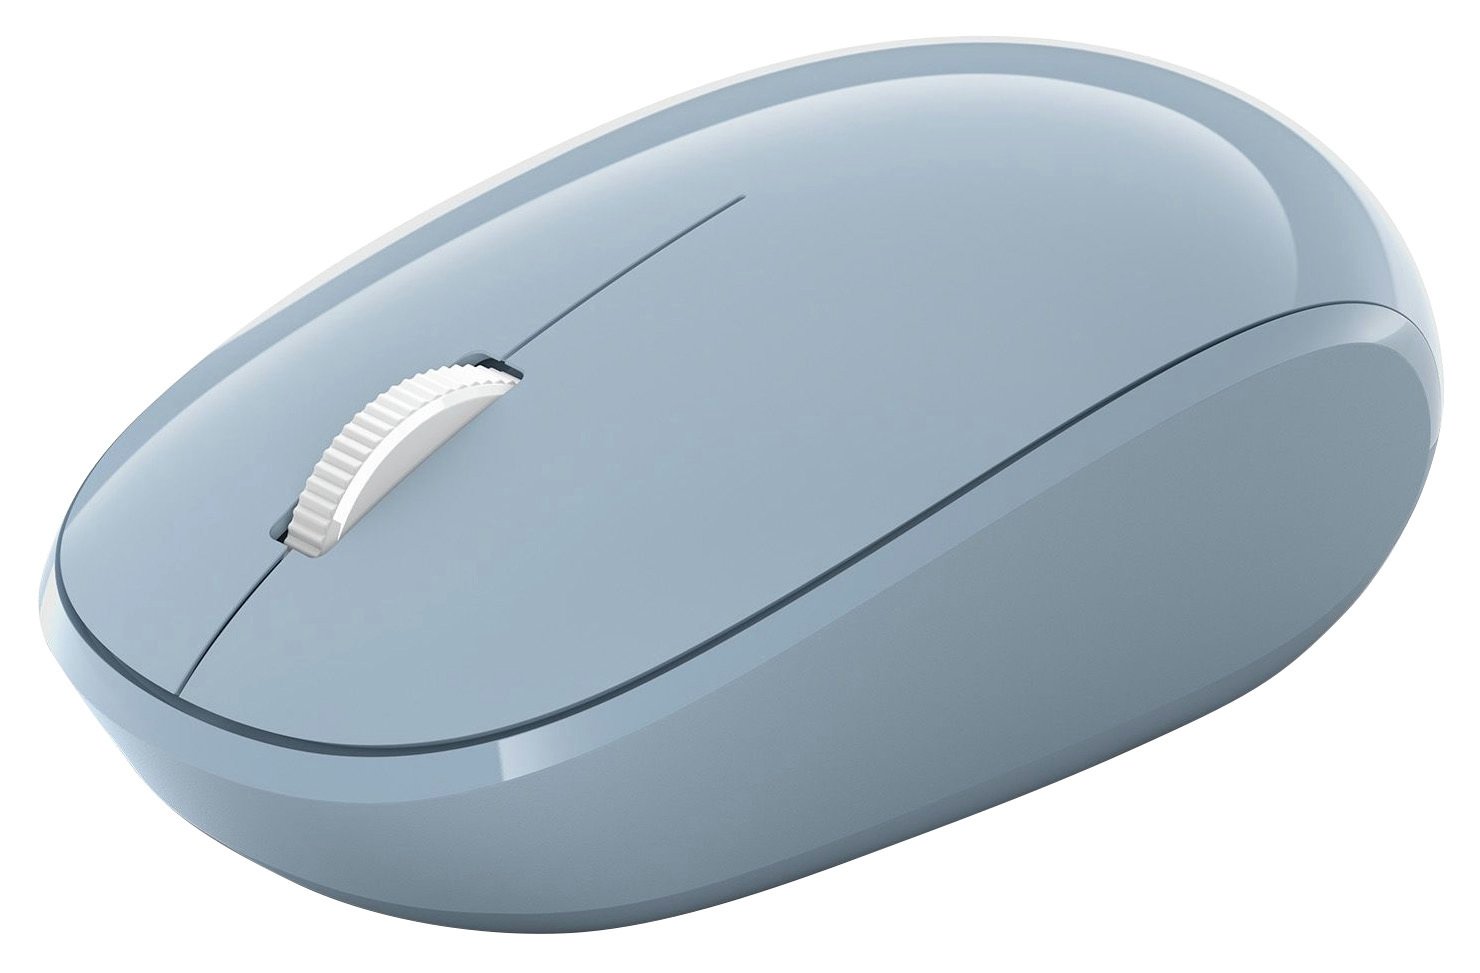 Microsoft Bluetooth Mouse Review